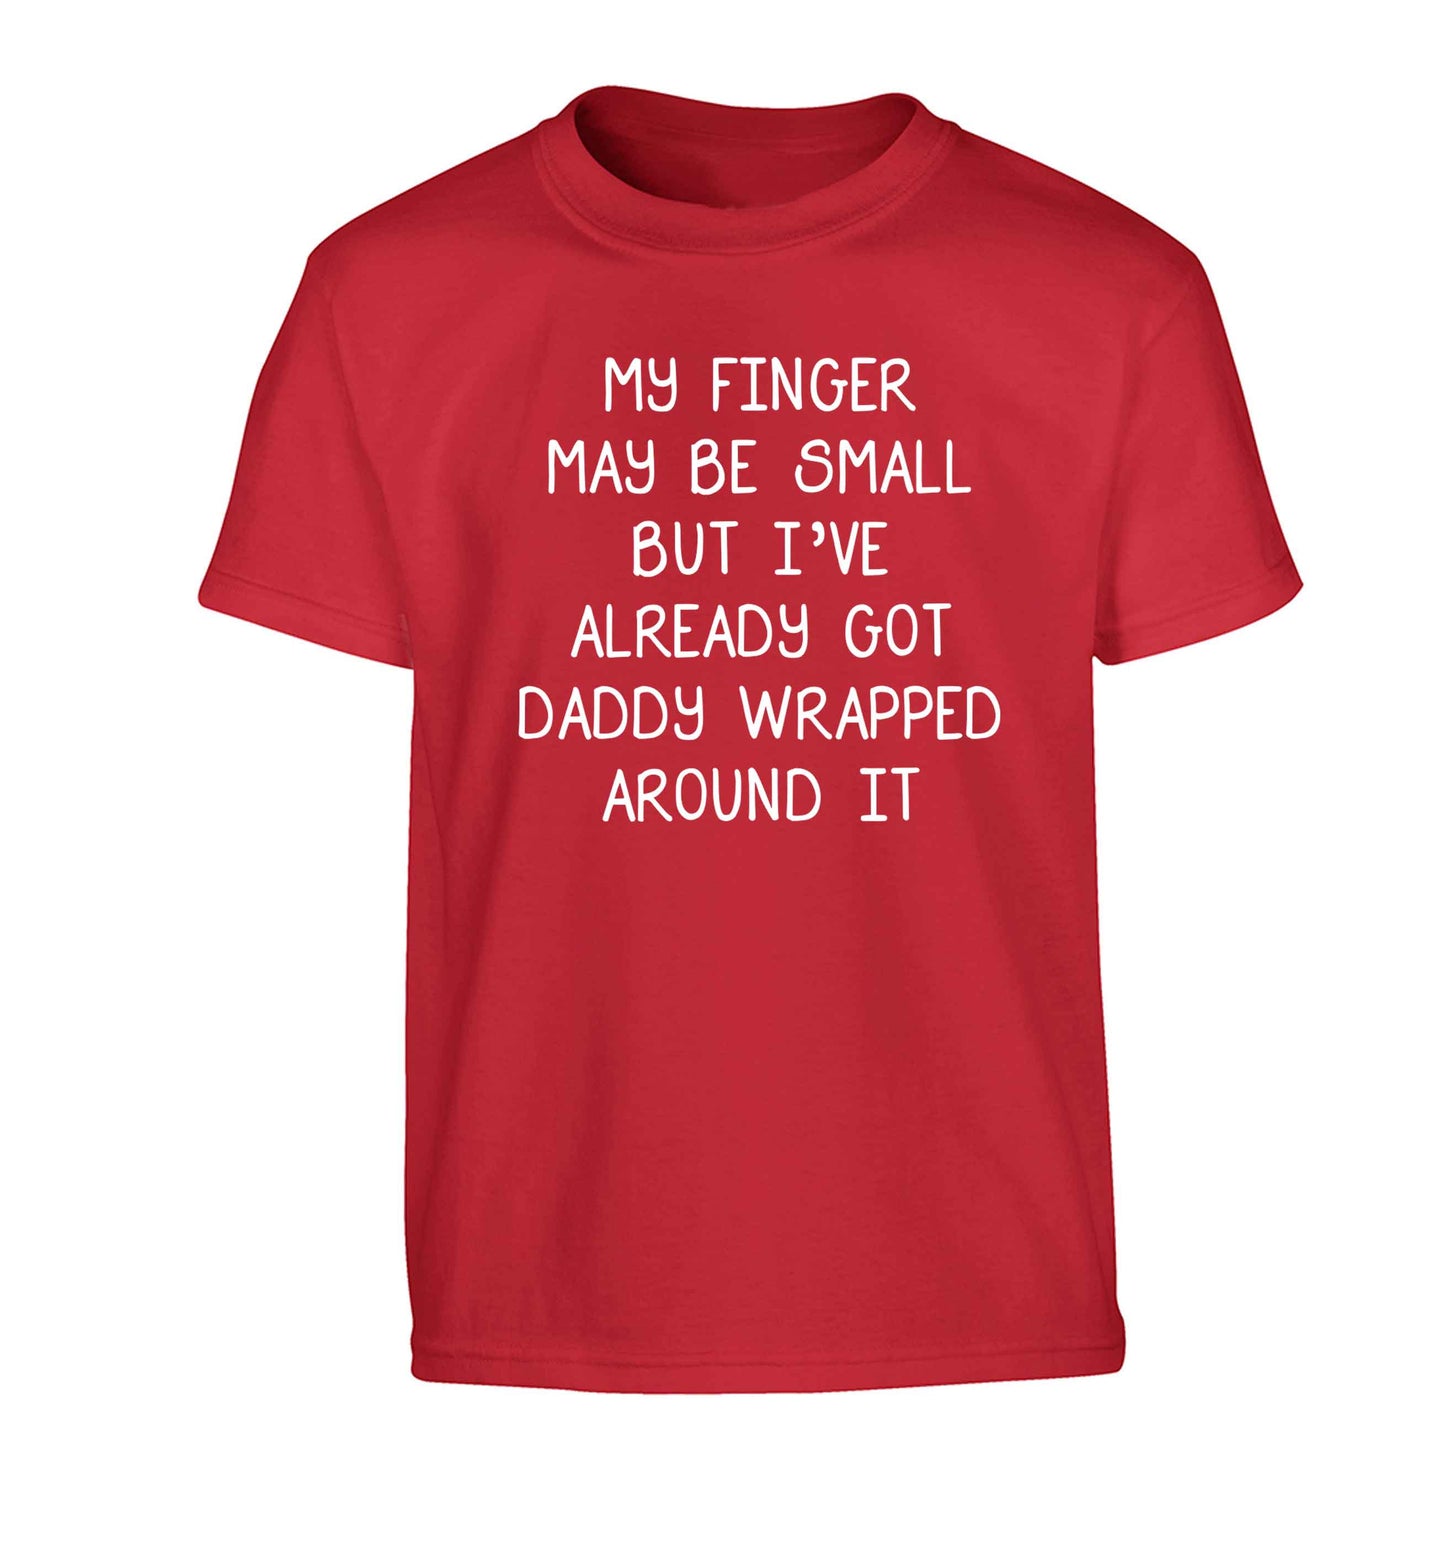 My finger may be small but I've already got daddy wrapped around it Children's red Tshirt 12-13 Years